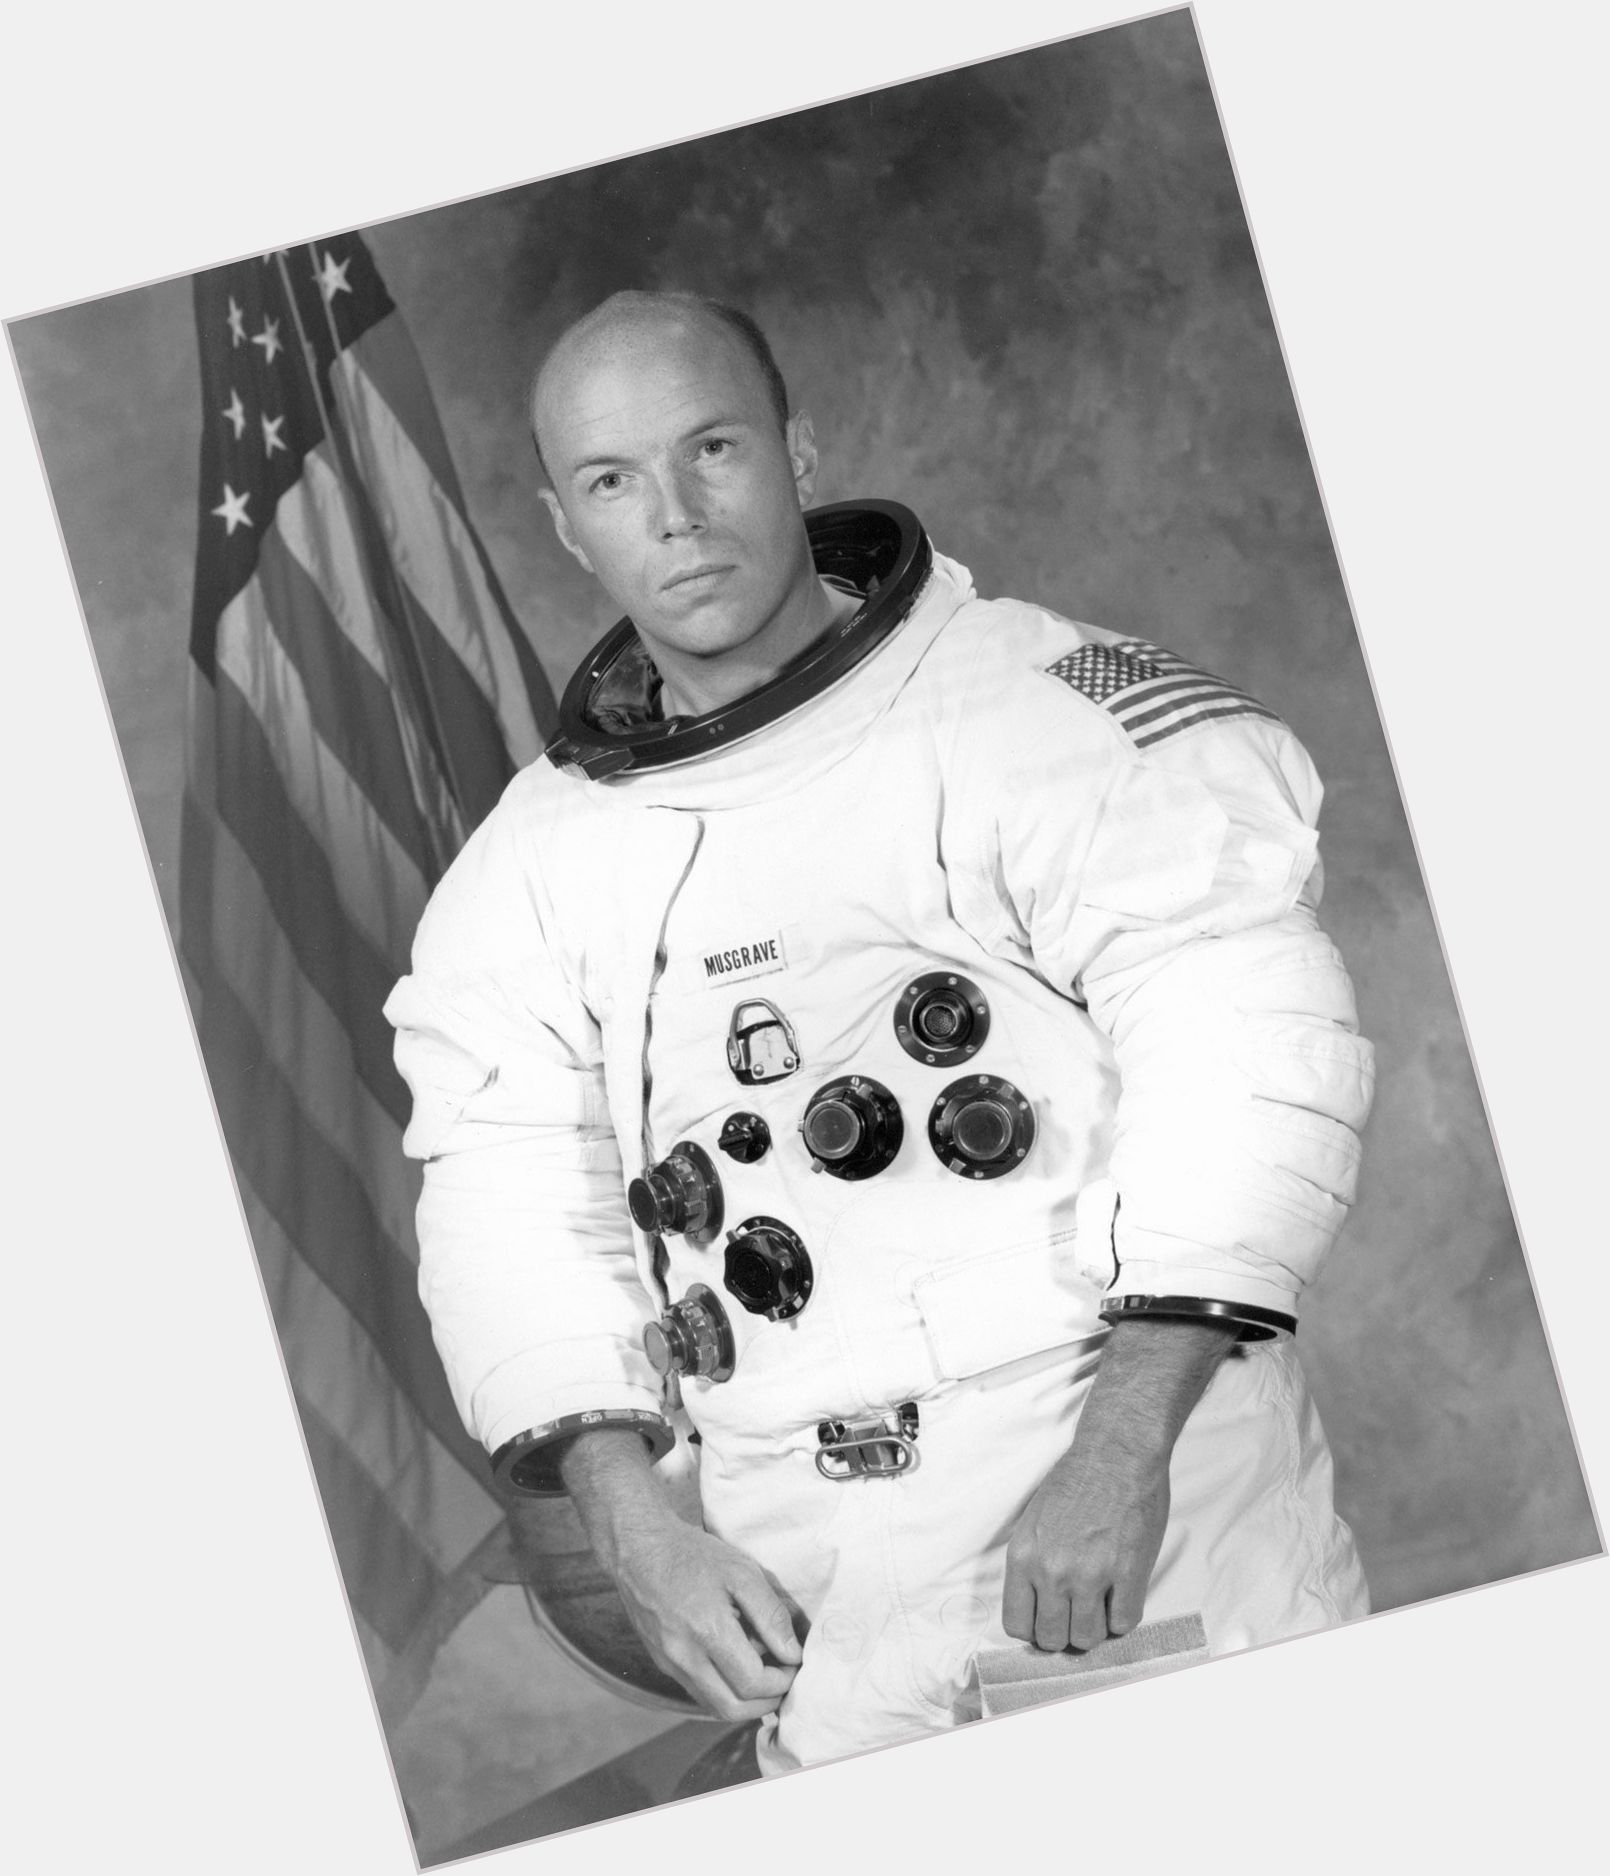 Story Musgrave new pic 1